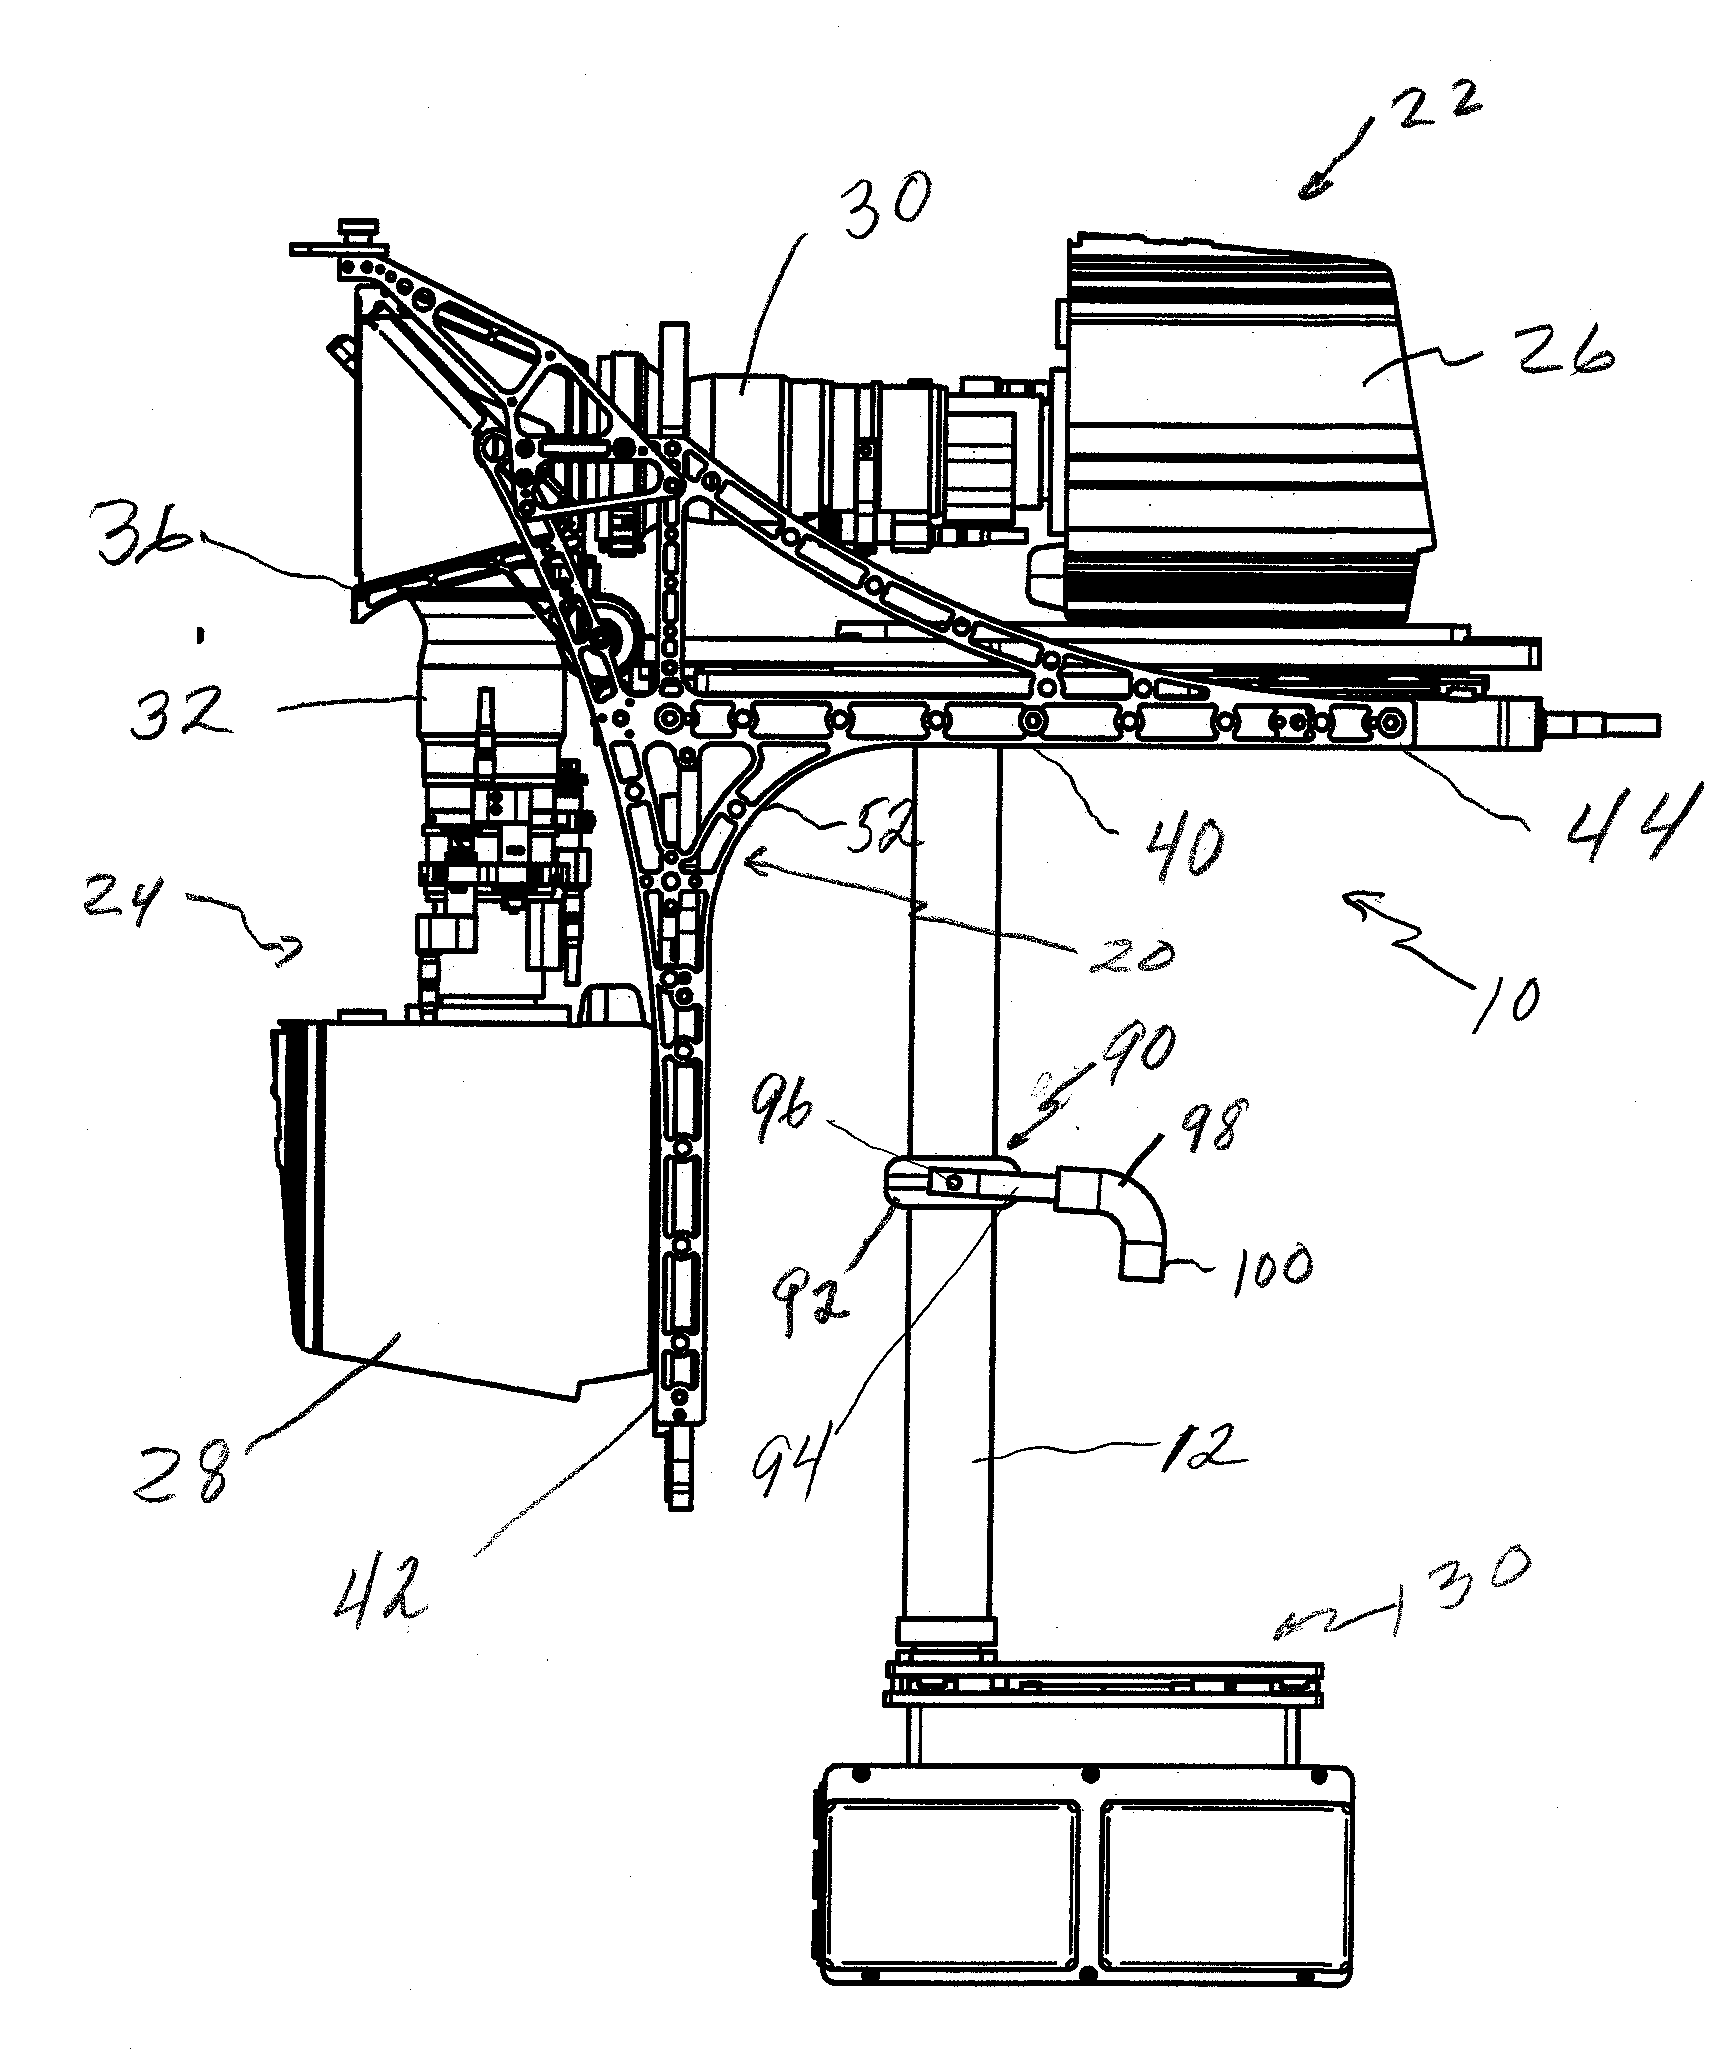 Platform for Stereoscopy for Hand-Held Film/Video Camera Stabilizers